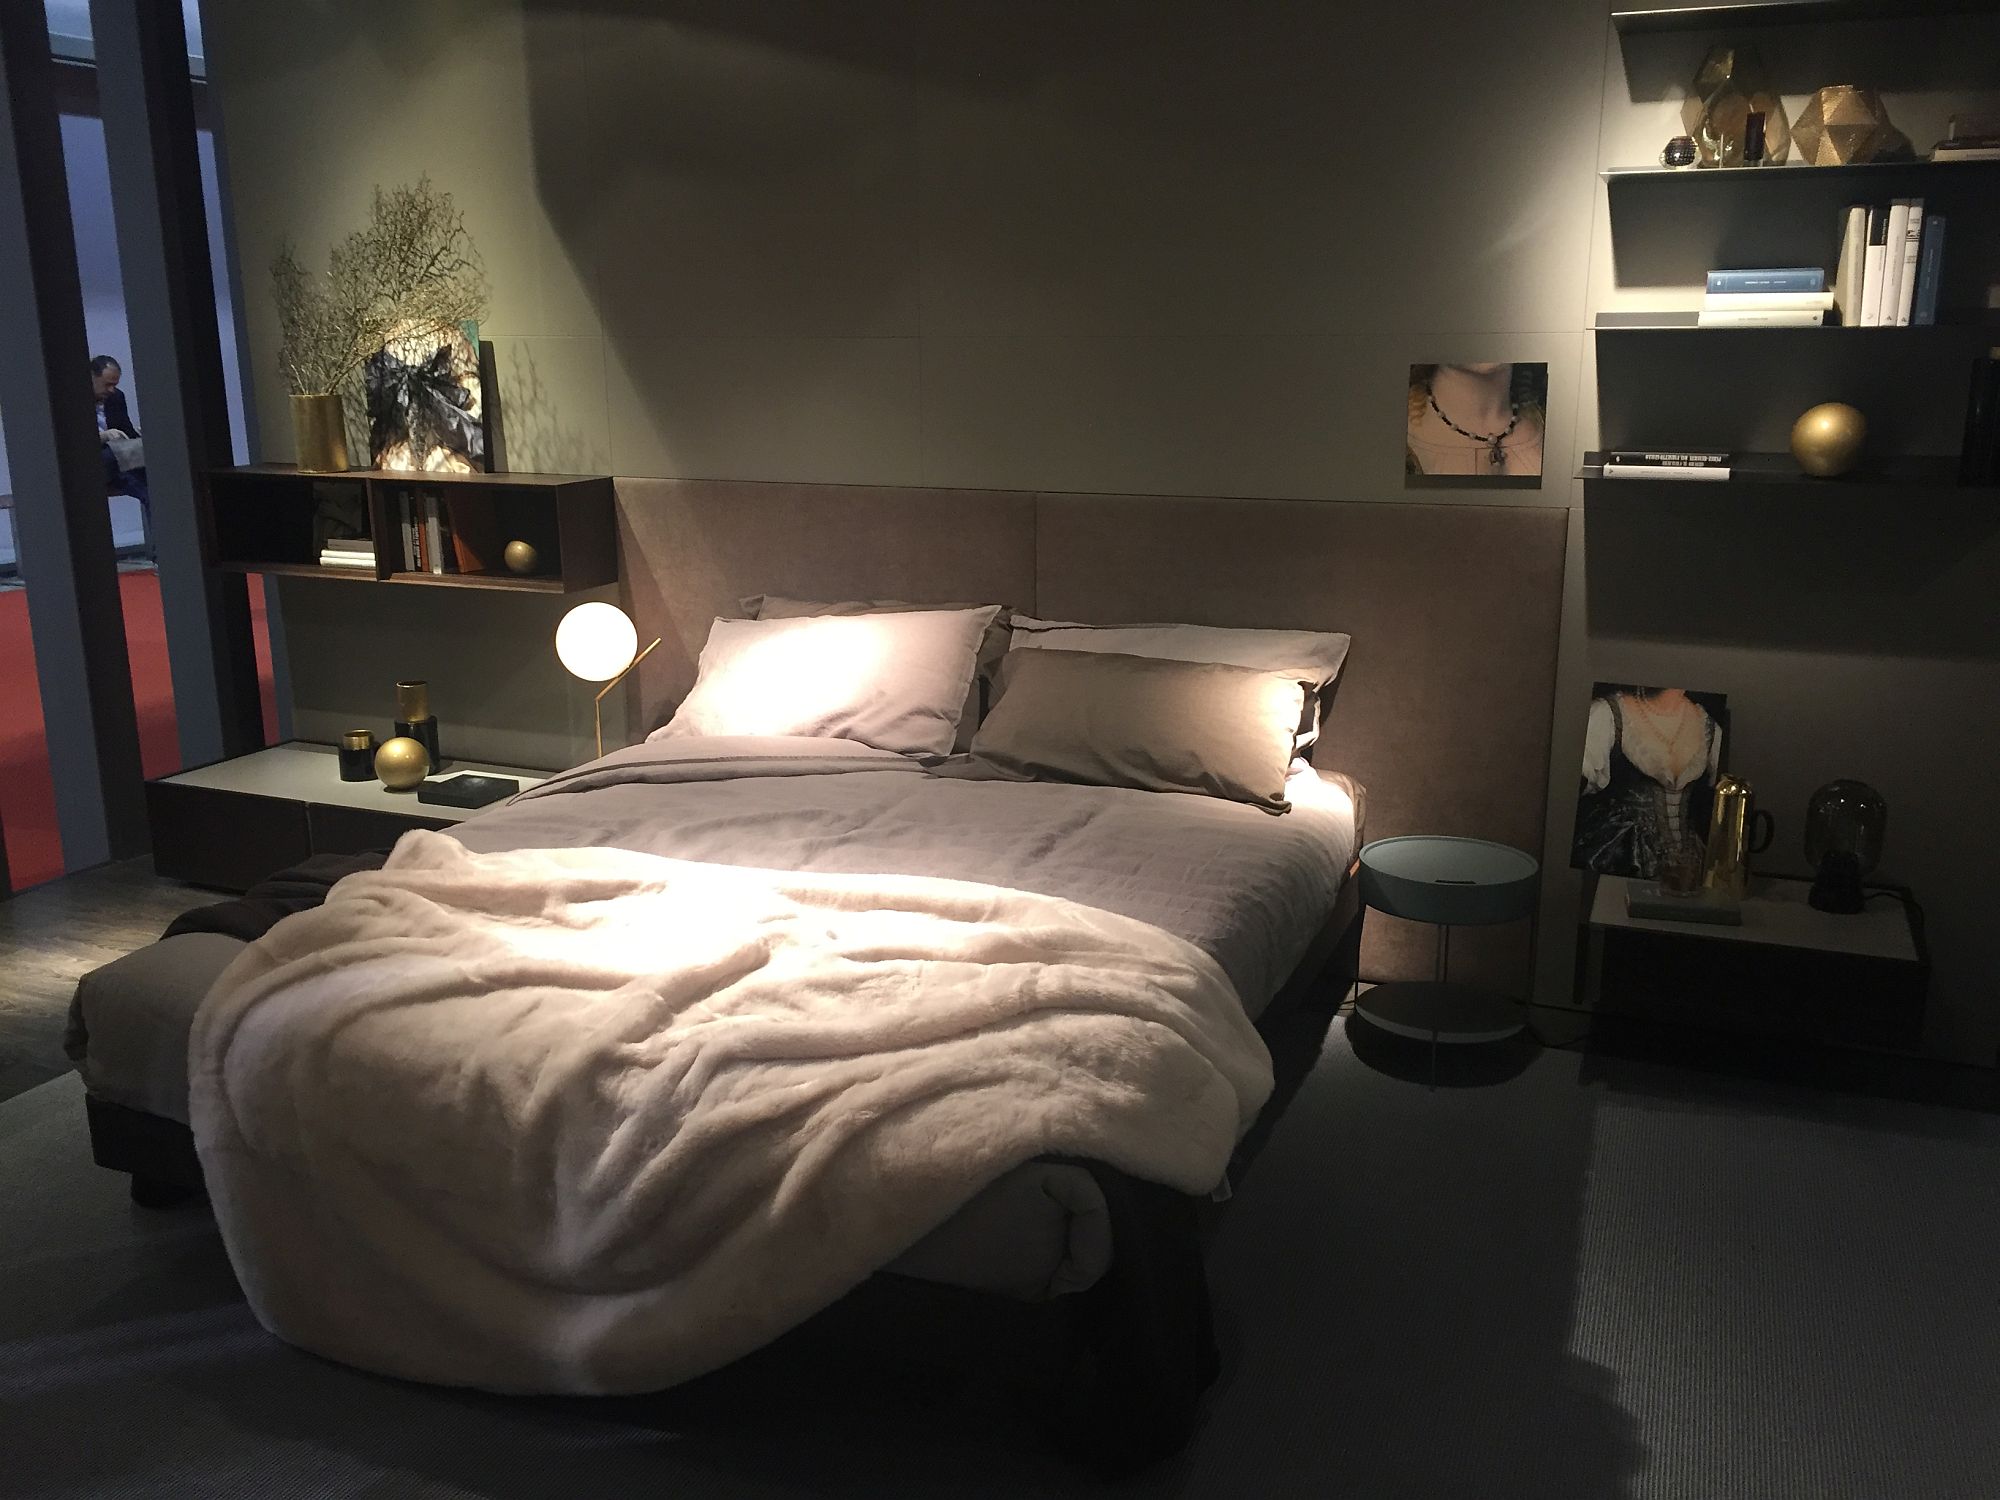 Headboard-of-the-bed-becomes-one-with-the-floating-shelves-and-nightstands-next-to-it